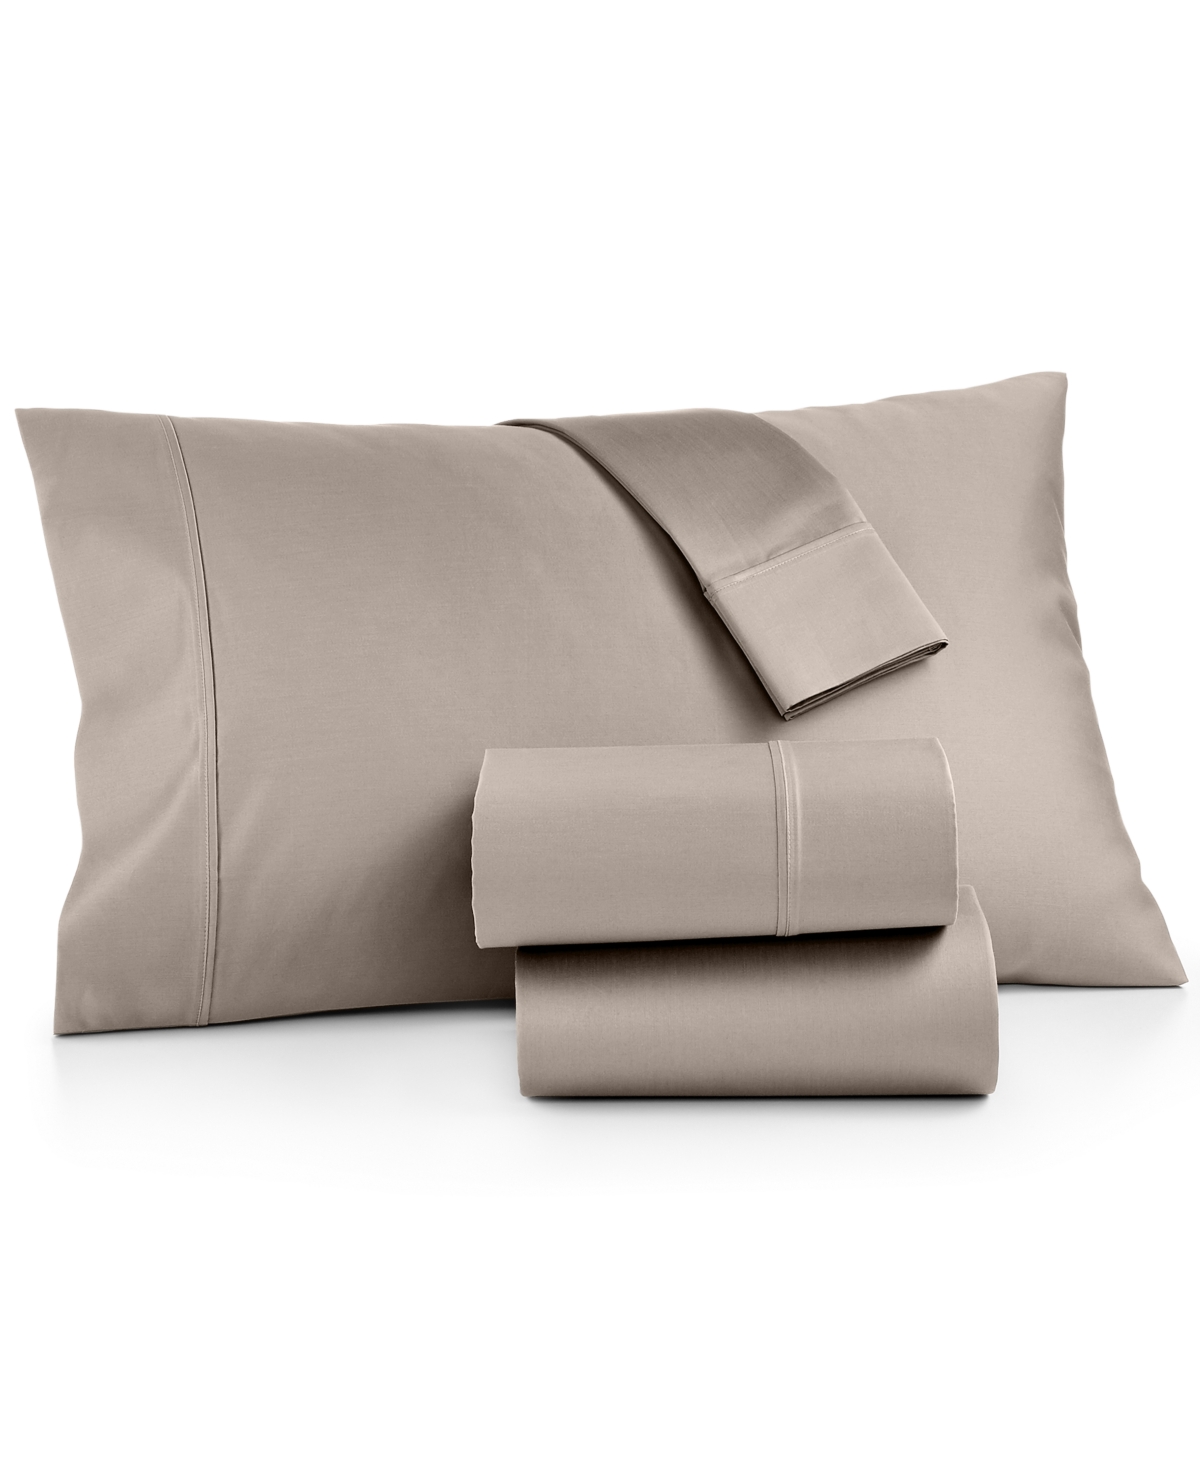 Aq Textiles Bergen House 100% Certified Egyptian Cotton 1000 Thread Count 4 Pc. Sheet Set, California King Beddi In Taupe